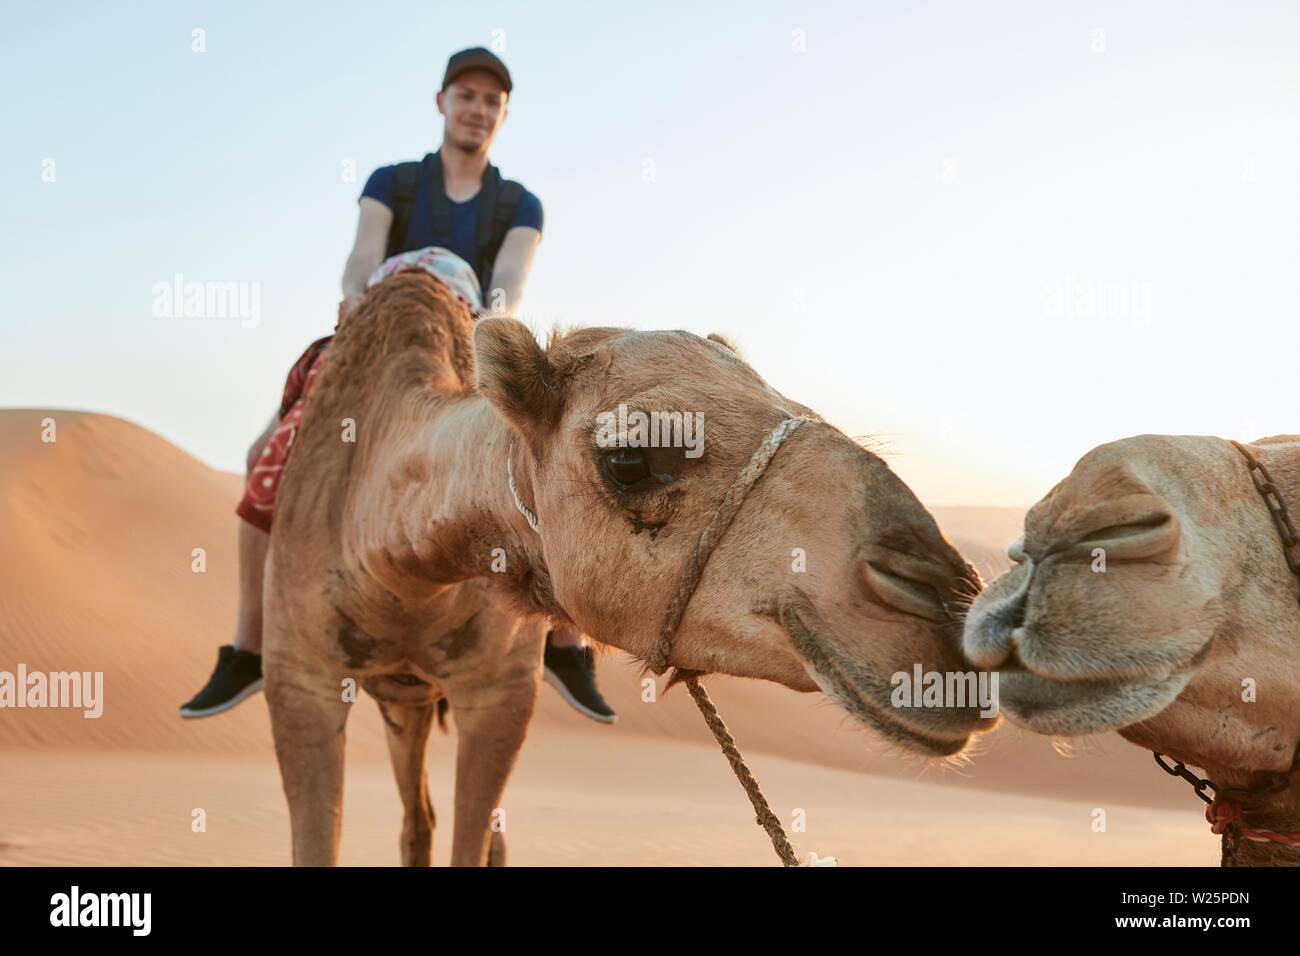 Camel riding in desert. Young man enjoying journey on sand dunes. Wahiba Sands in Sultanate of Oman Stock Photo